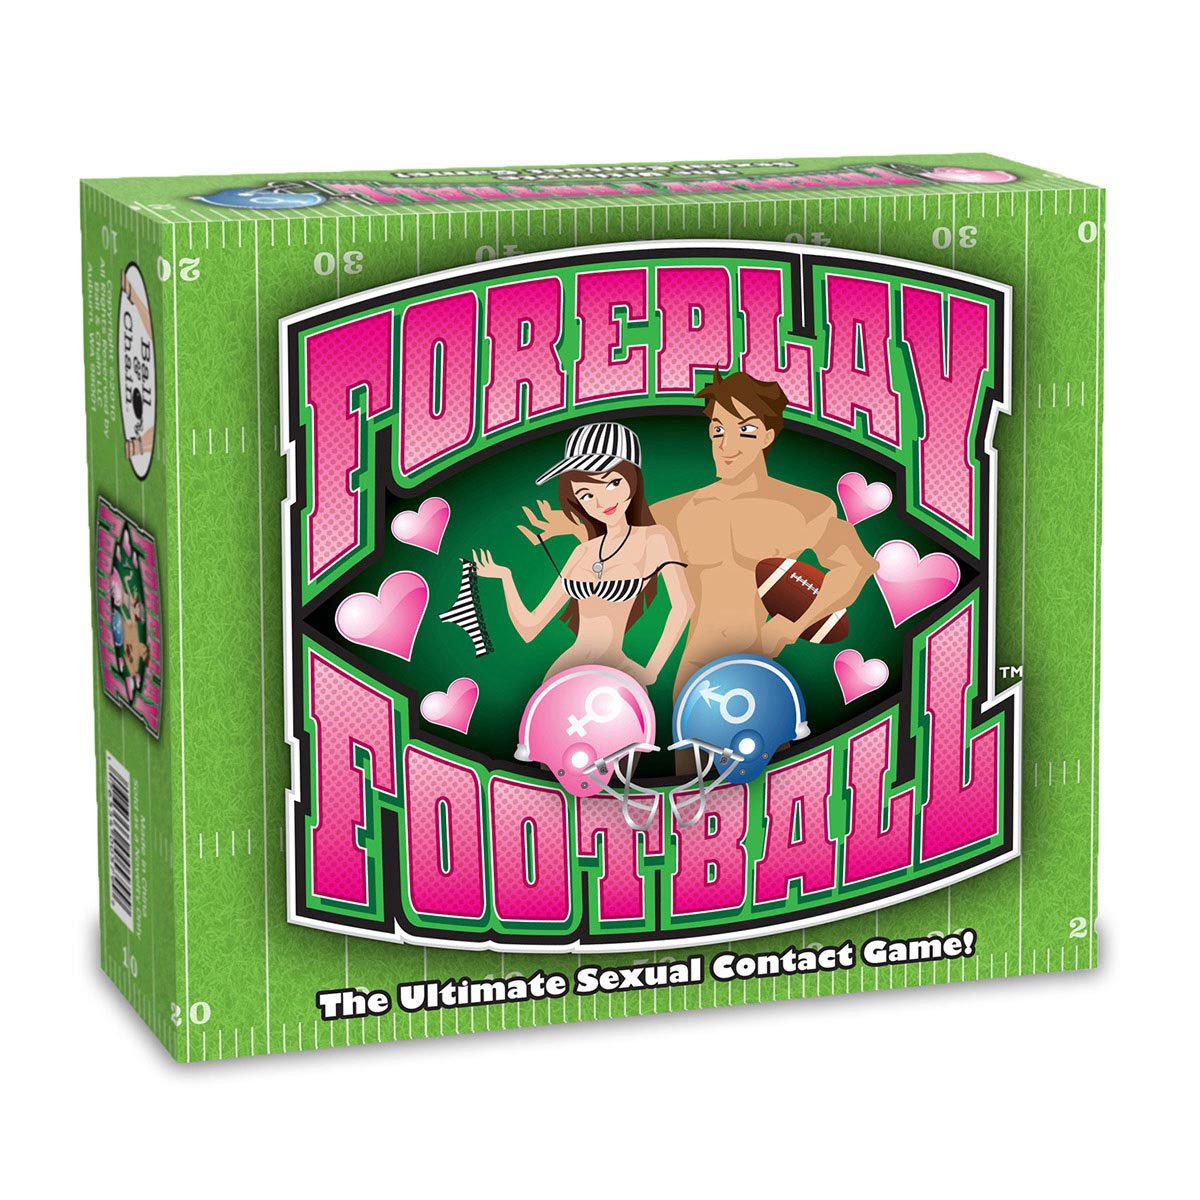 Ball & Chain Foreplay Football - The Ultimate Sexual Contact Game!